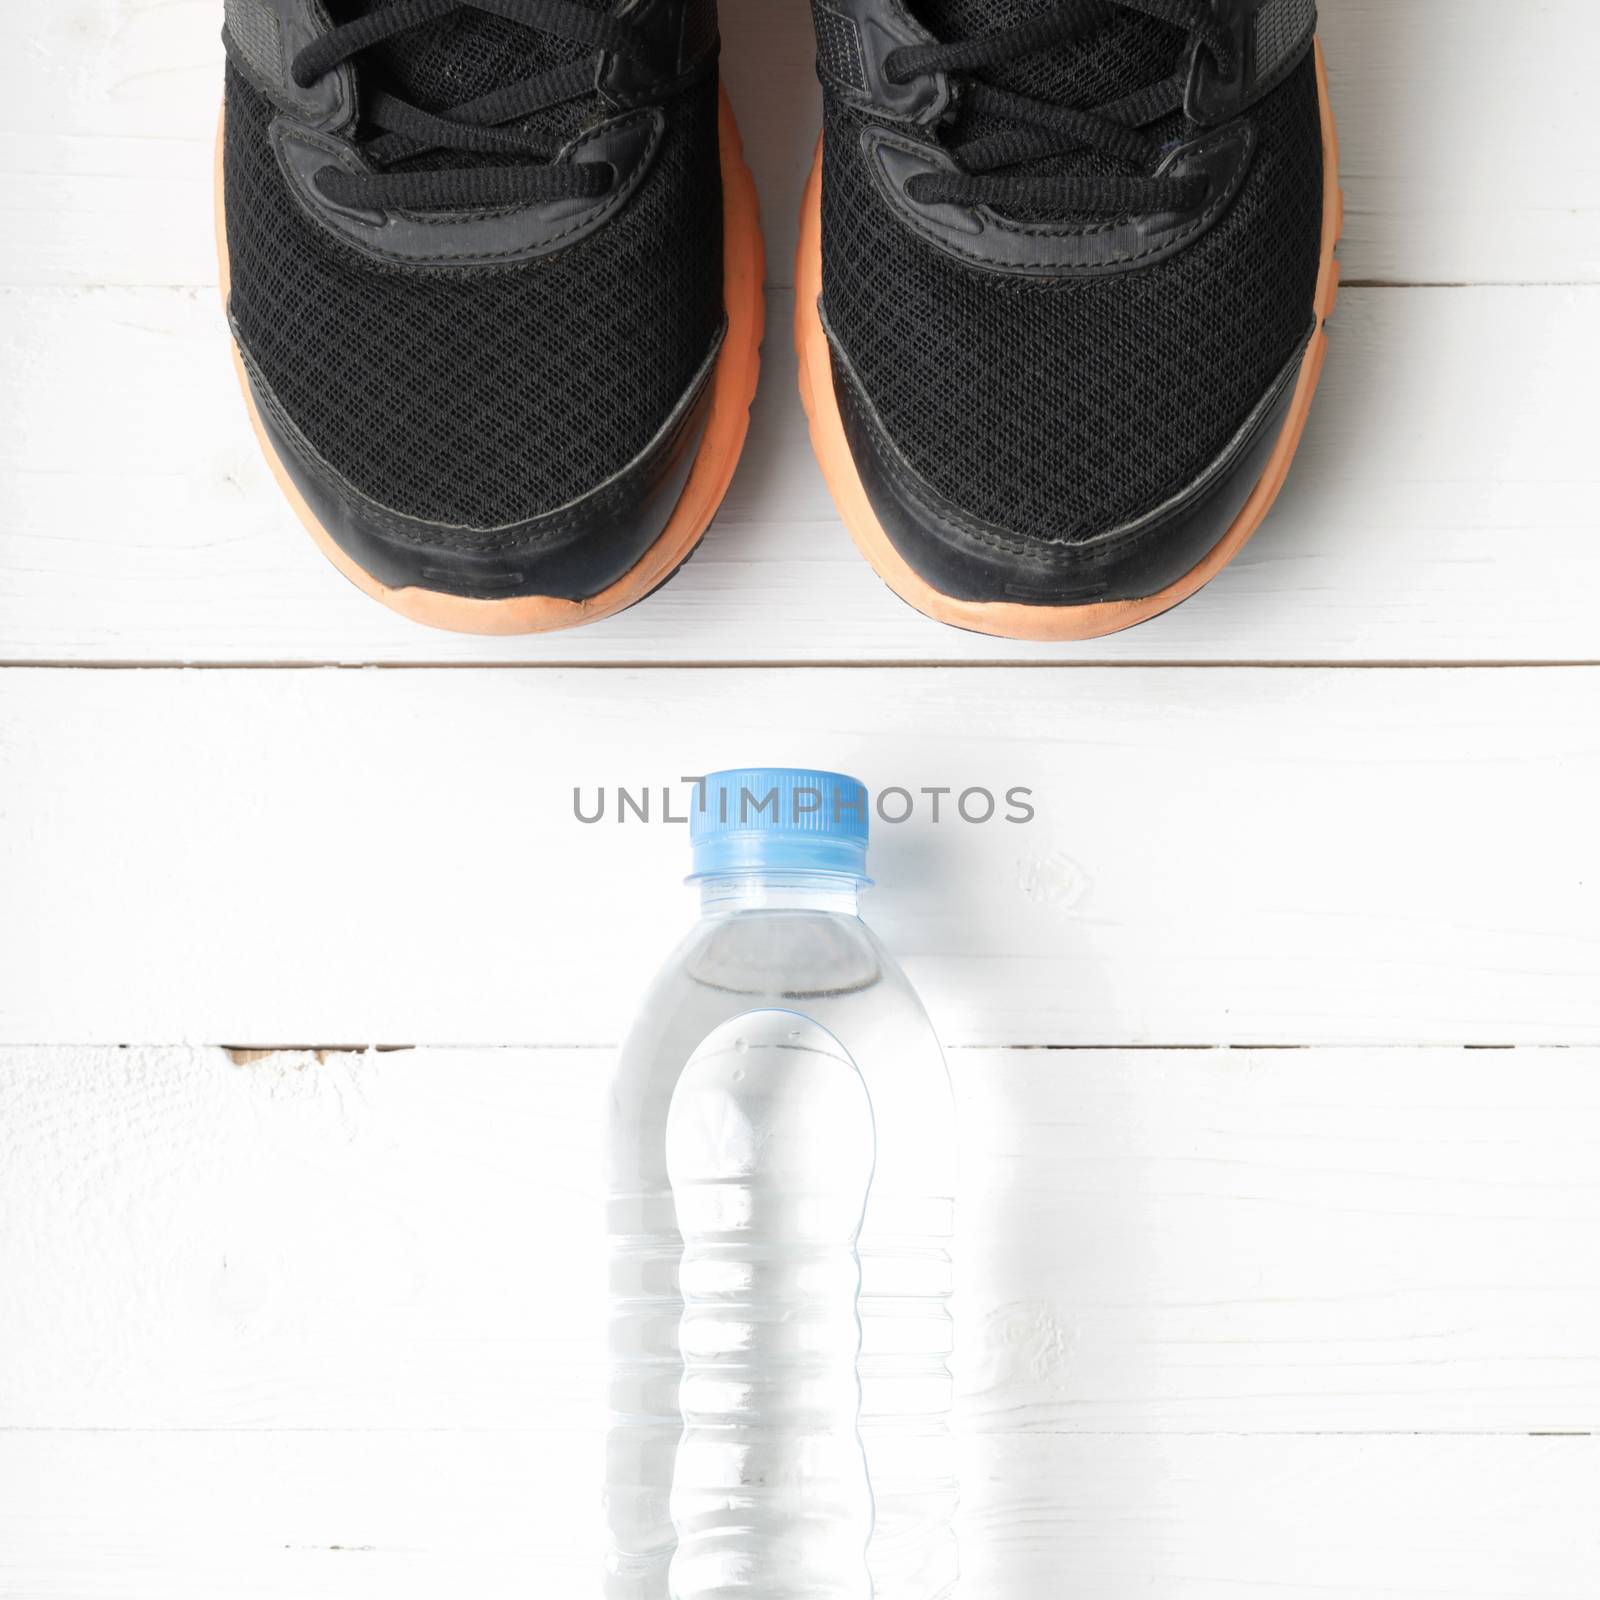 running shoes and drinking water by ammza12